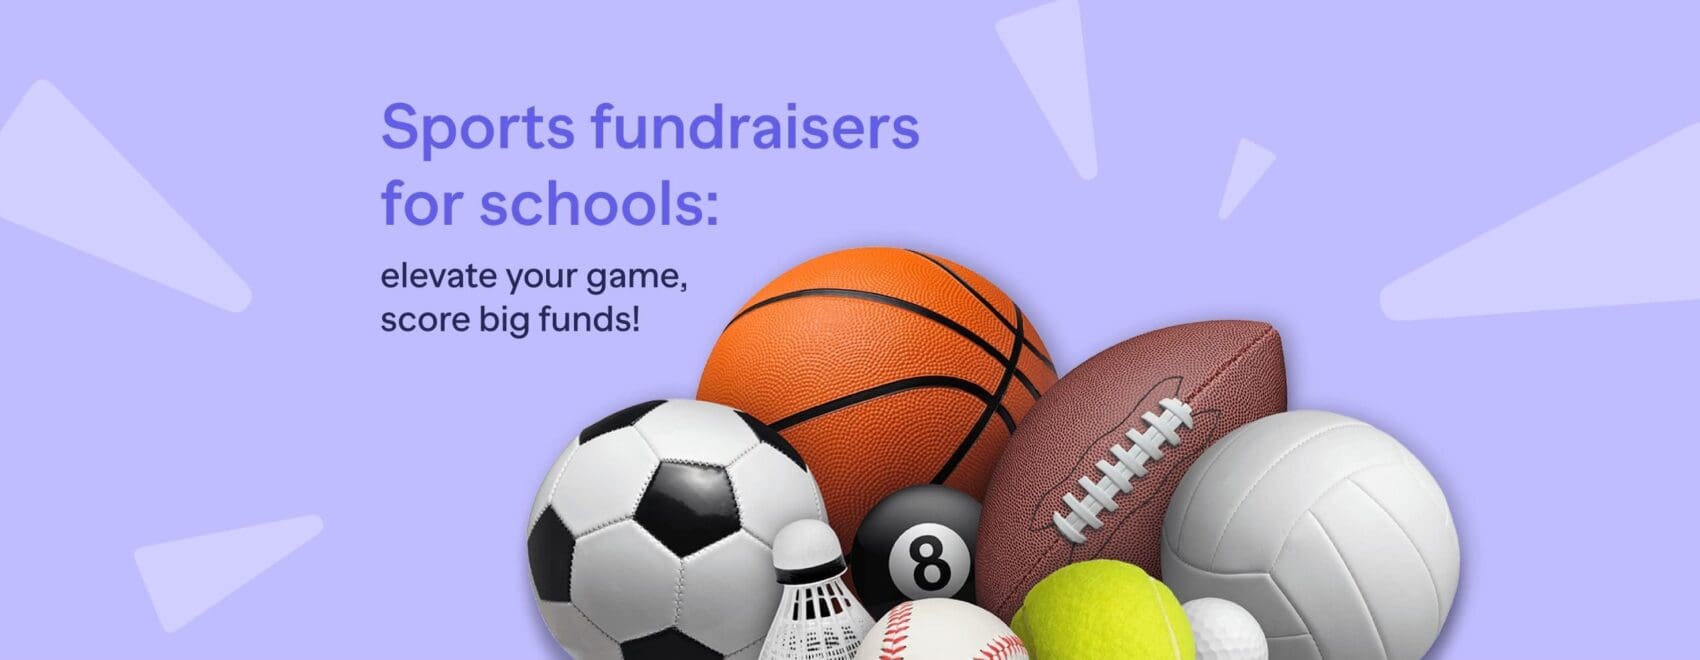 Sports fundraisers for schools elevate your game score big funds